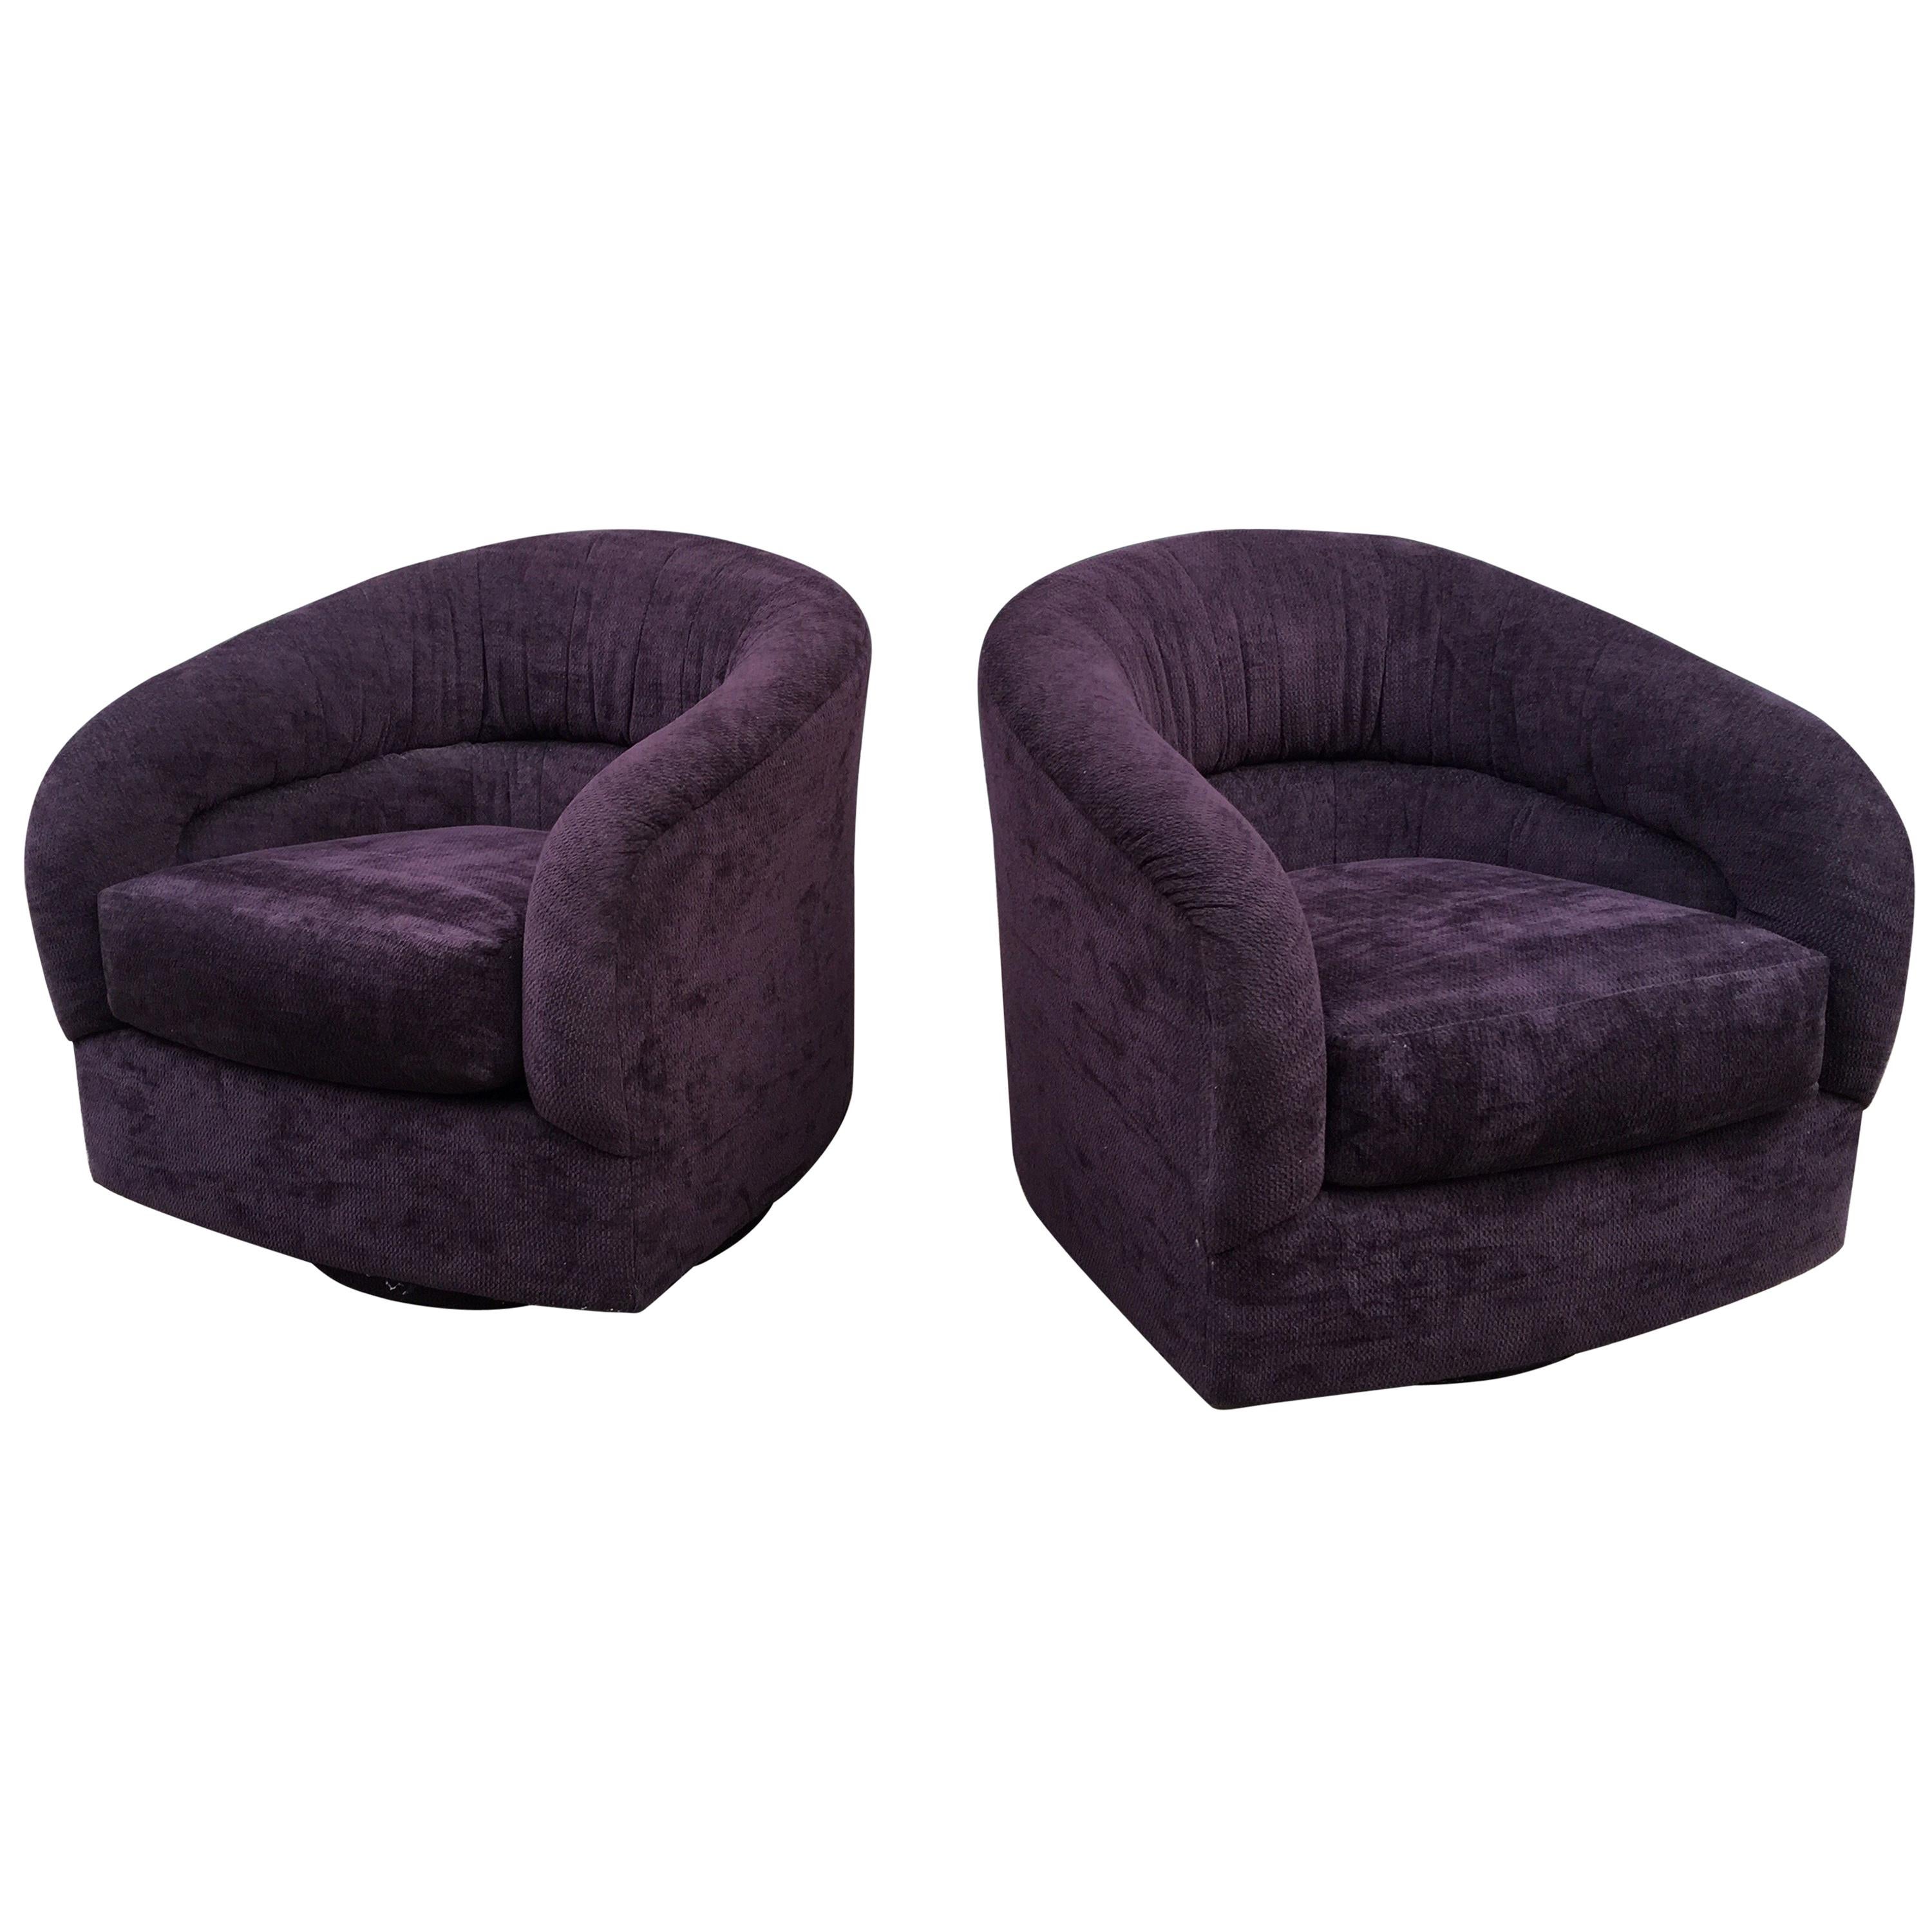 Pair of Swivel or Rocking Barrel Chairs in the Manner of Milo Baughman